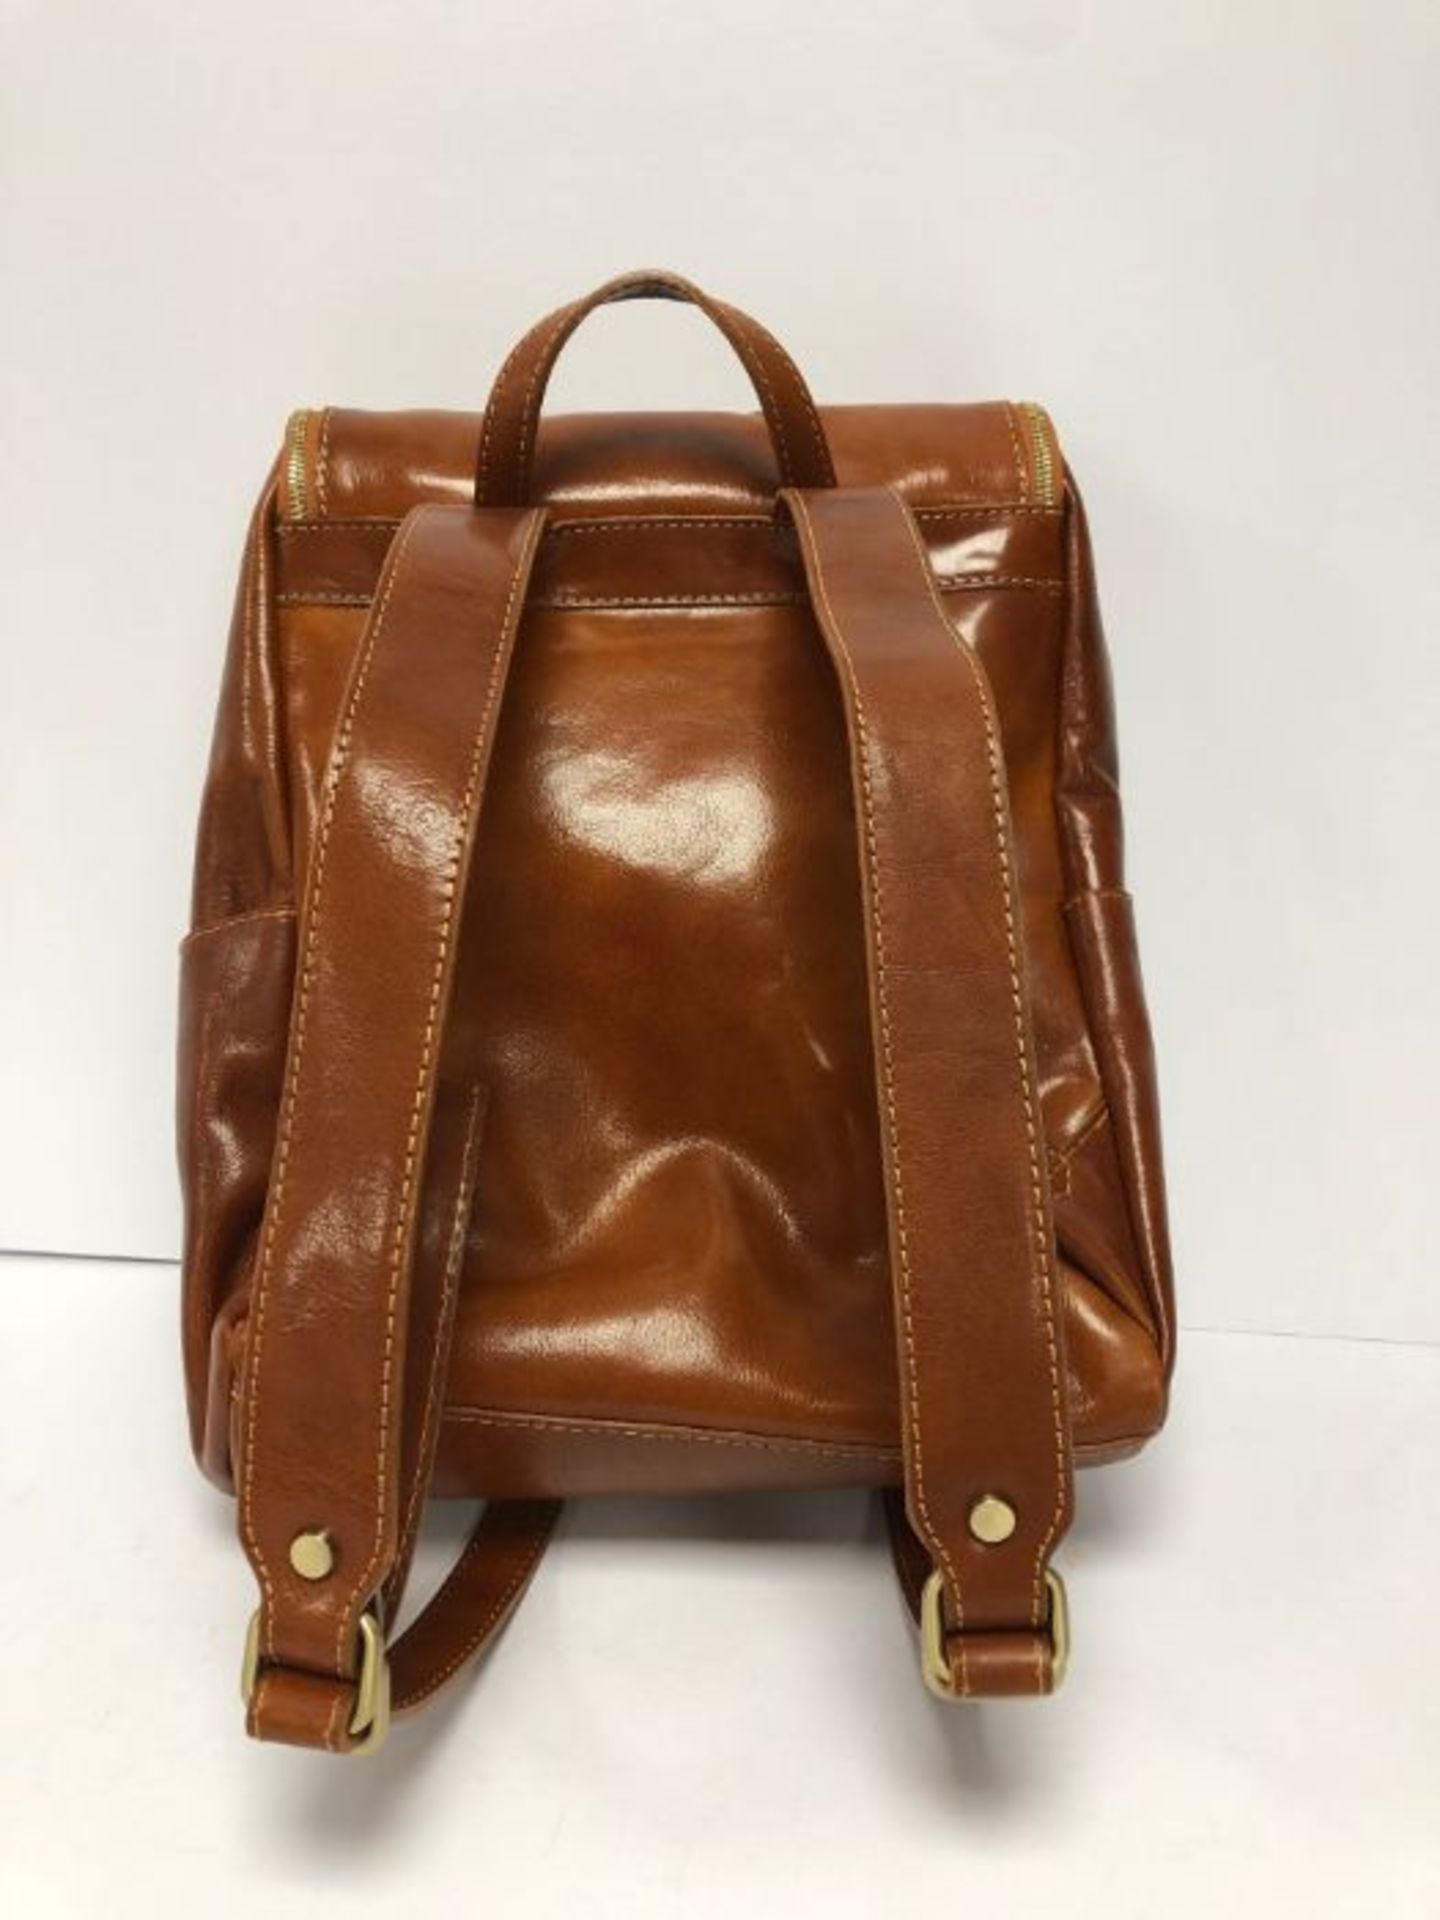 Vera Pelle Brown Leather Back Pack - Image 3 of 3